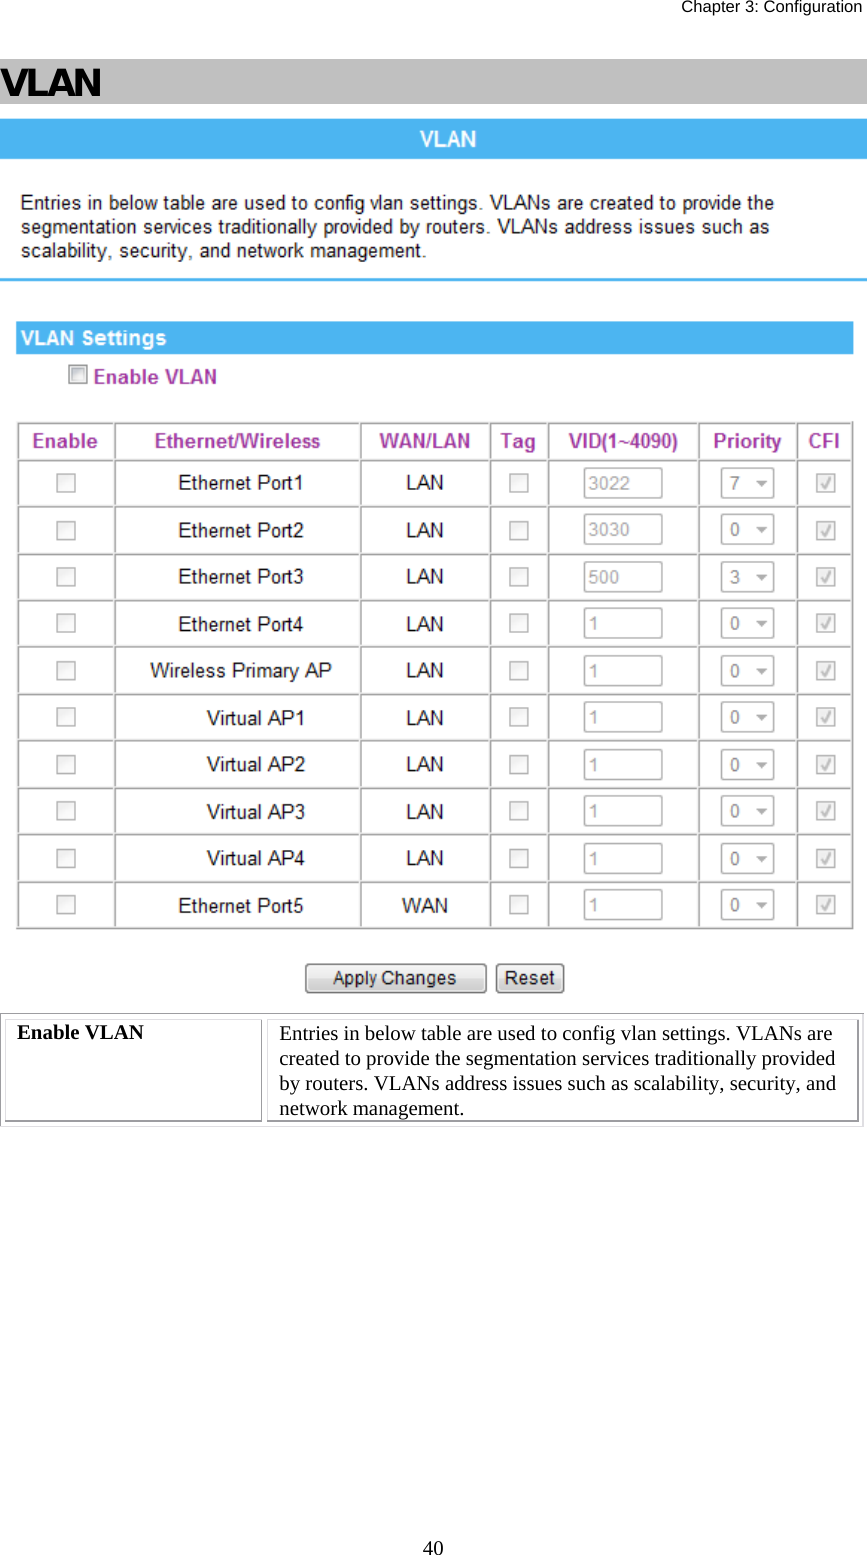   Chapter 3: Configuration  40VLAN  Enable VLAN  Entries in below table are used to config vlan settings. VLANs are created to provide the segmentation services traditionally provided by routers. VLANs address issues such as scalability, security, and network management.       